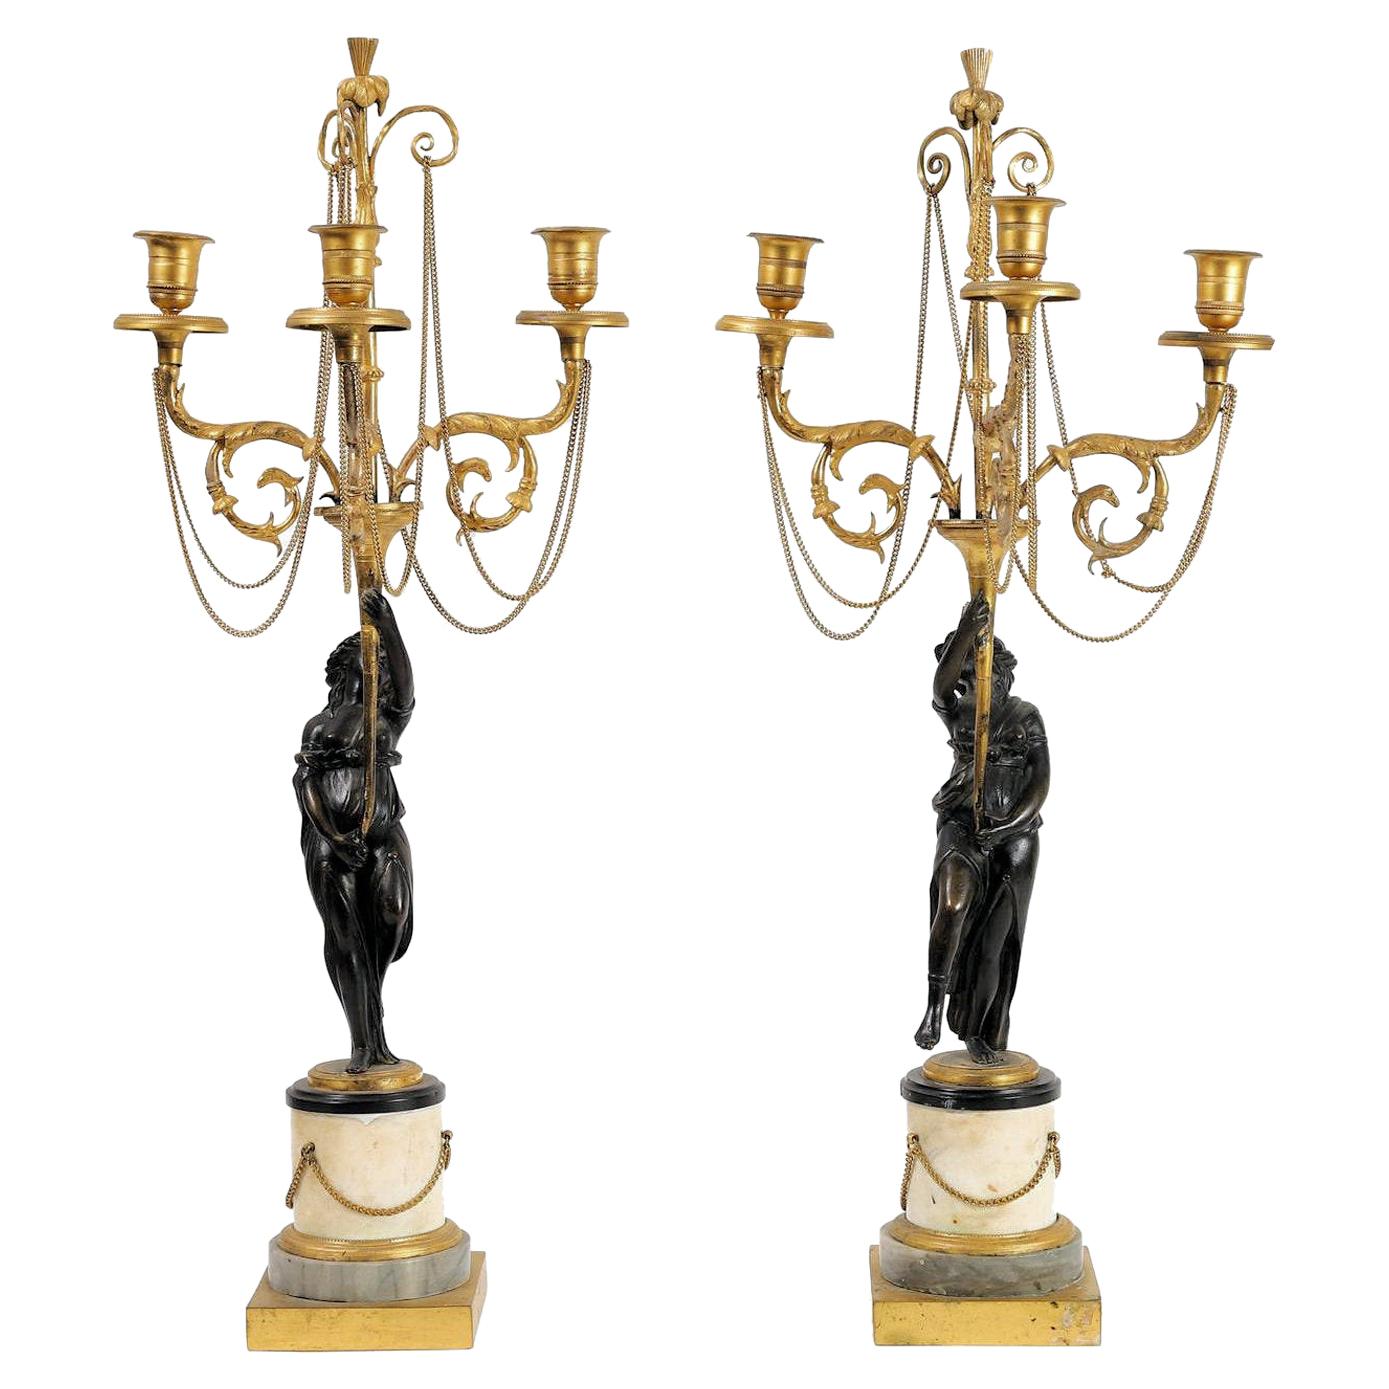 Pair of Neoclassical Directoire Gilt and Patinated Bronze Figural Candelabras For Sale